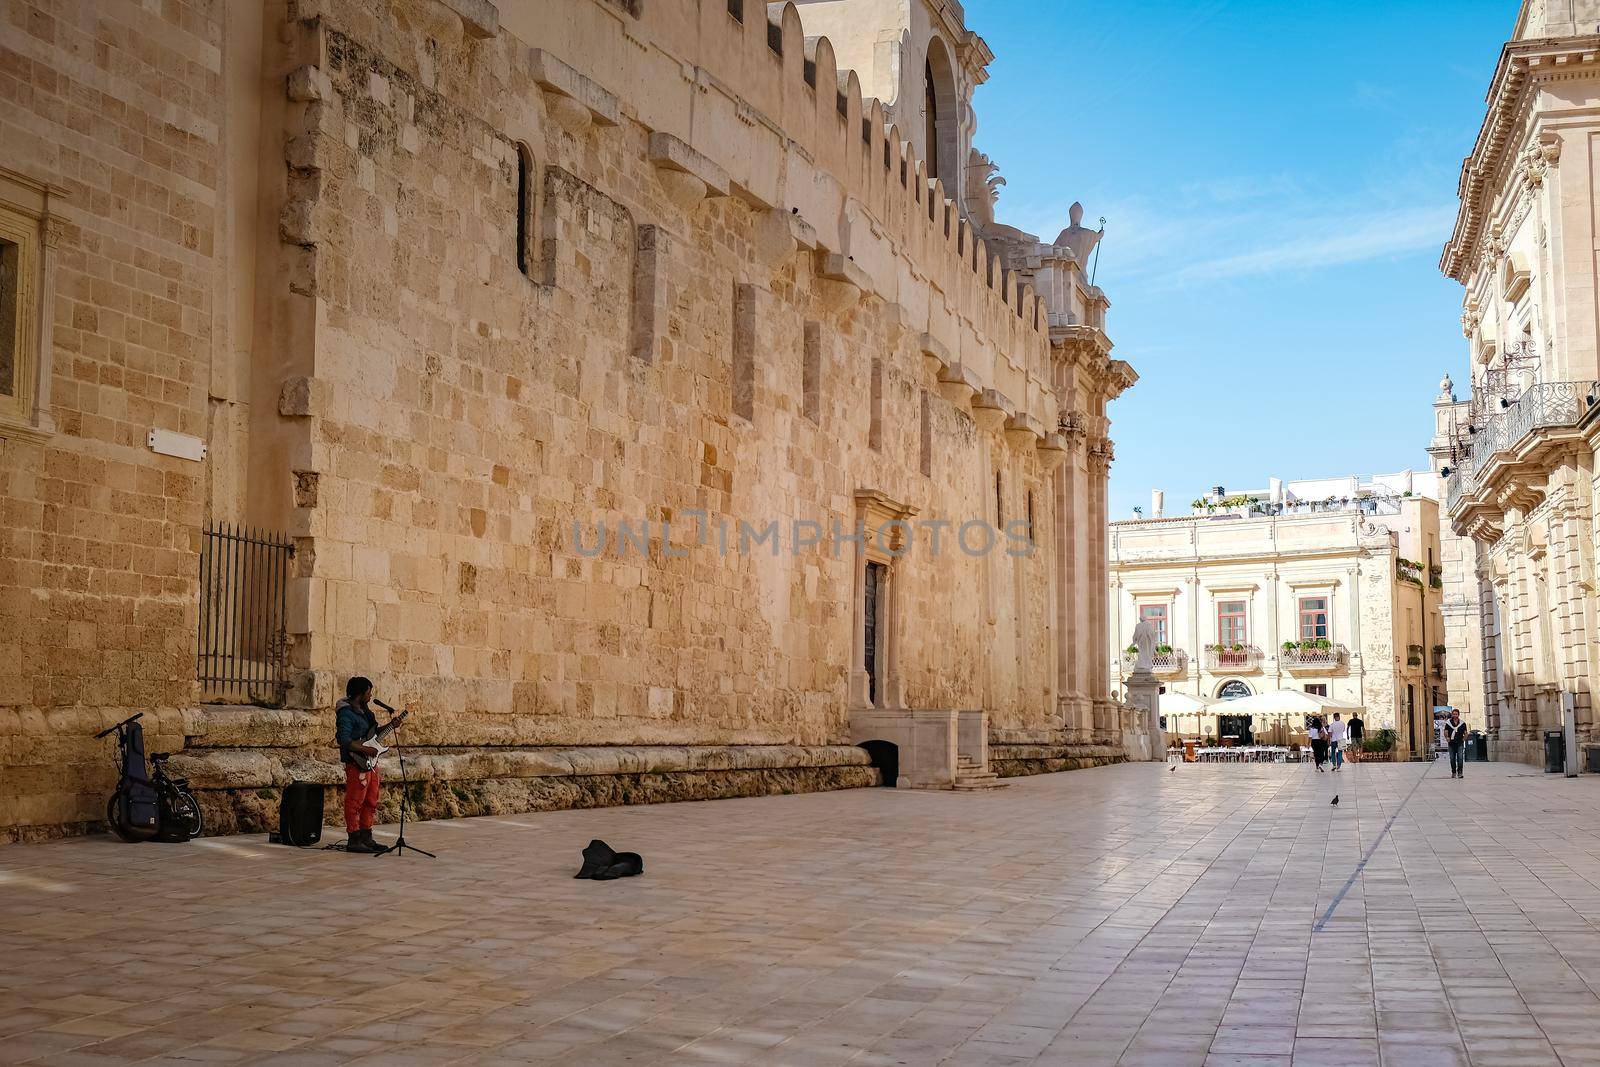 Ortigia in Syracuse in the Morning. Travel Photography from Syracuse, Italy on the island of Sicily. Cathedral Plaza and market with people whear face protection during the 2020 pandemic by fokkebok